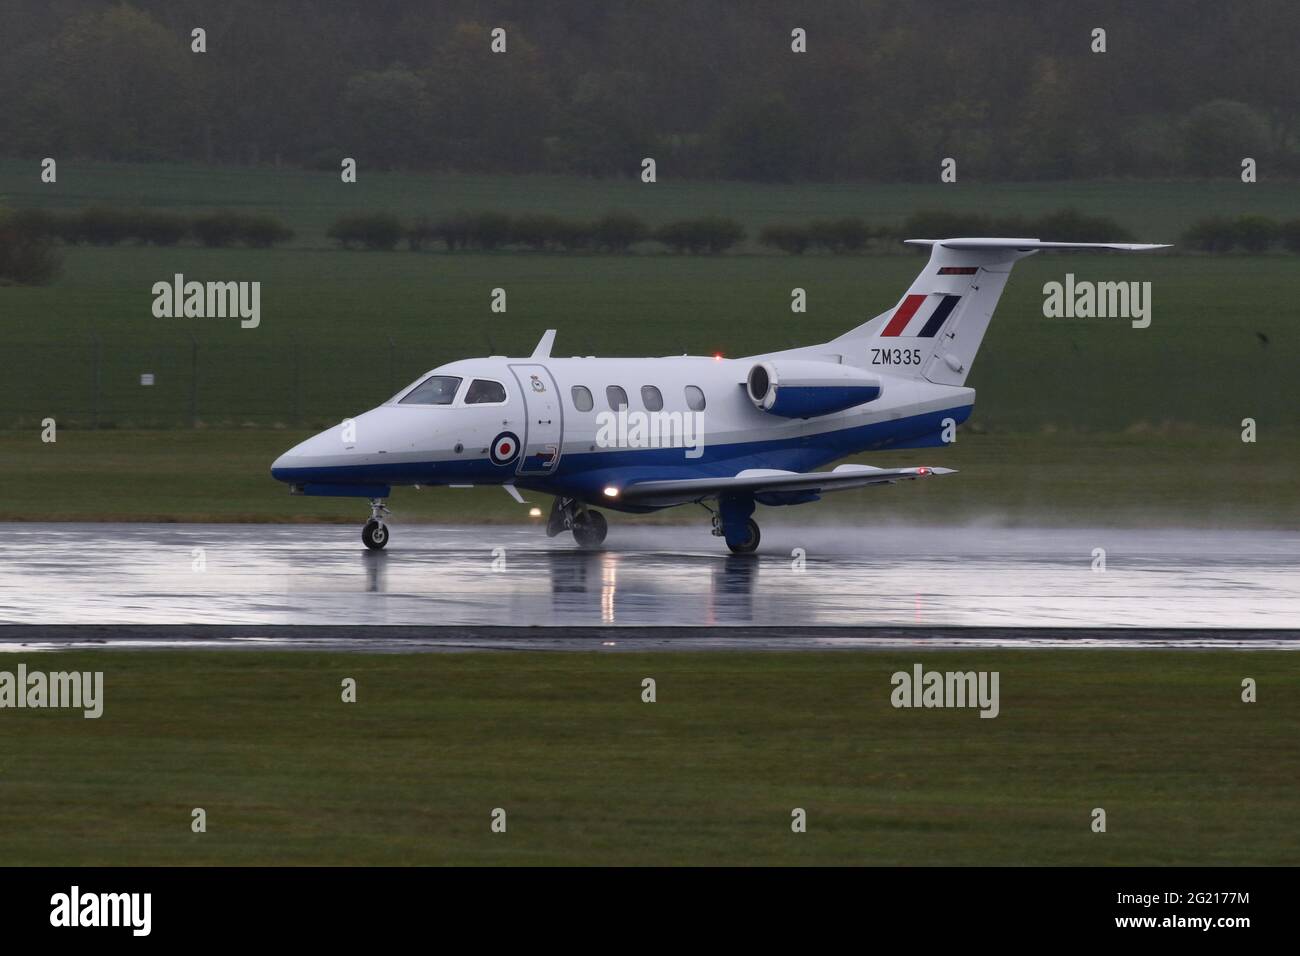 ZM335, an Embraer Phenom T.1 operated by No.45 Squadron of the Royal Air Force, departing from Prestwick International Airport in Ayrshire, Scotland. Stock Photo